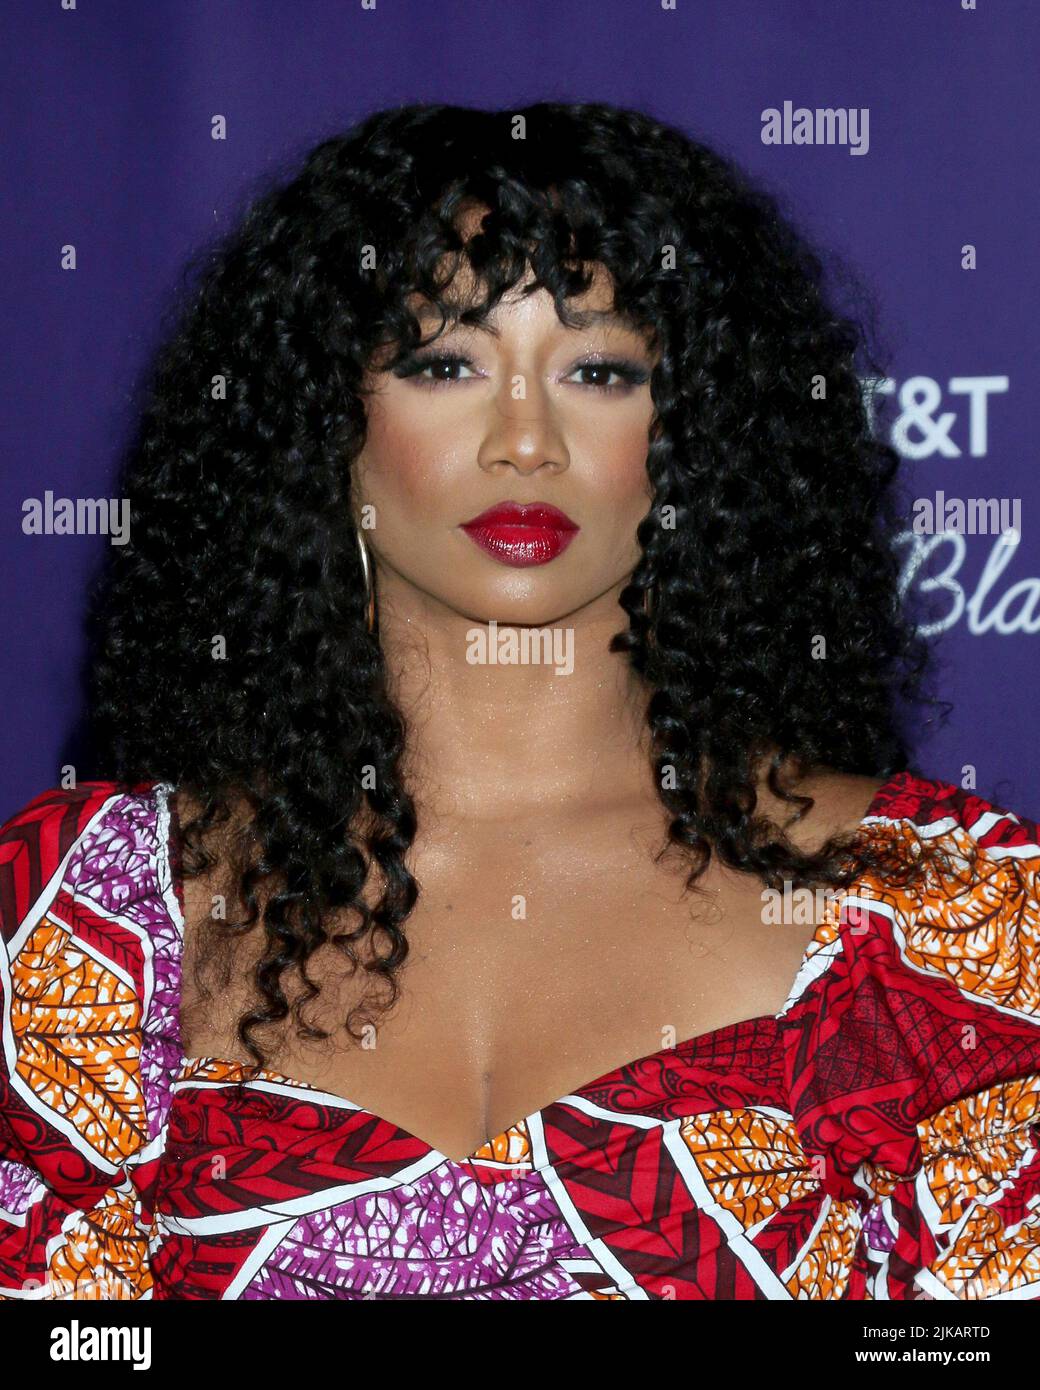 LOS ANGELES - JUL 31:  Monique Coleman at the Heirs of Afrika 5th Annual International Women of Power Awards at the Sheraton Grand Hotel on July 31, 2022 in Los Angeles, CA (Photo by Katrina Jordan/Sipa USA) Stock Photo